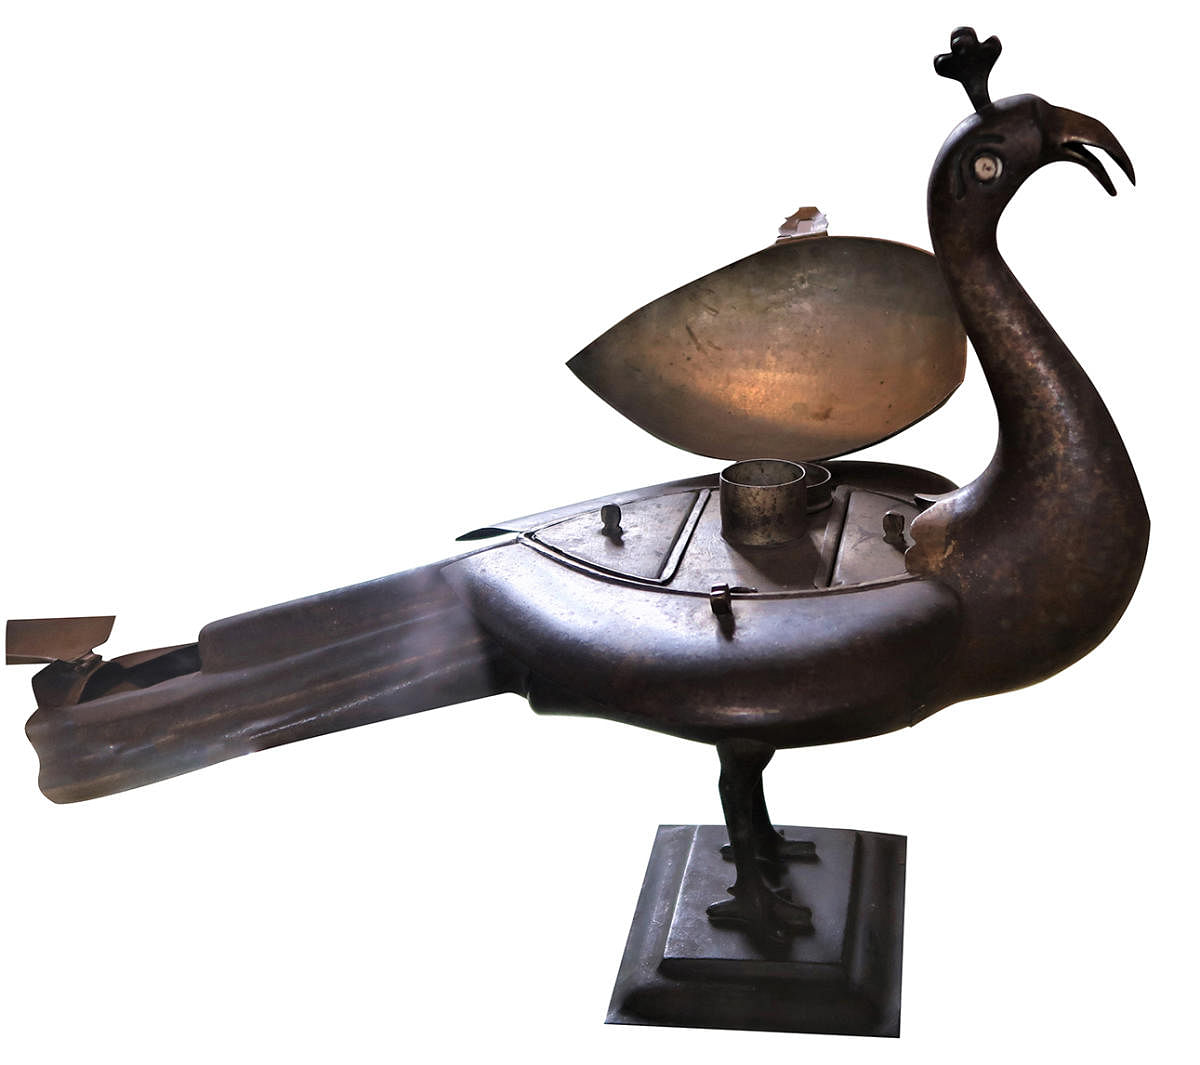 A paan dan in the shape of a peacock and made of brass, dates to the 17th or 18th century and belongs to Longvek in Cambodia. It’s on display at the National Museum of Cambodia